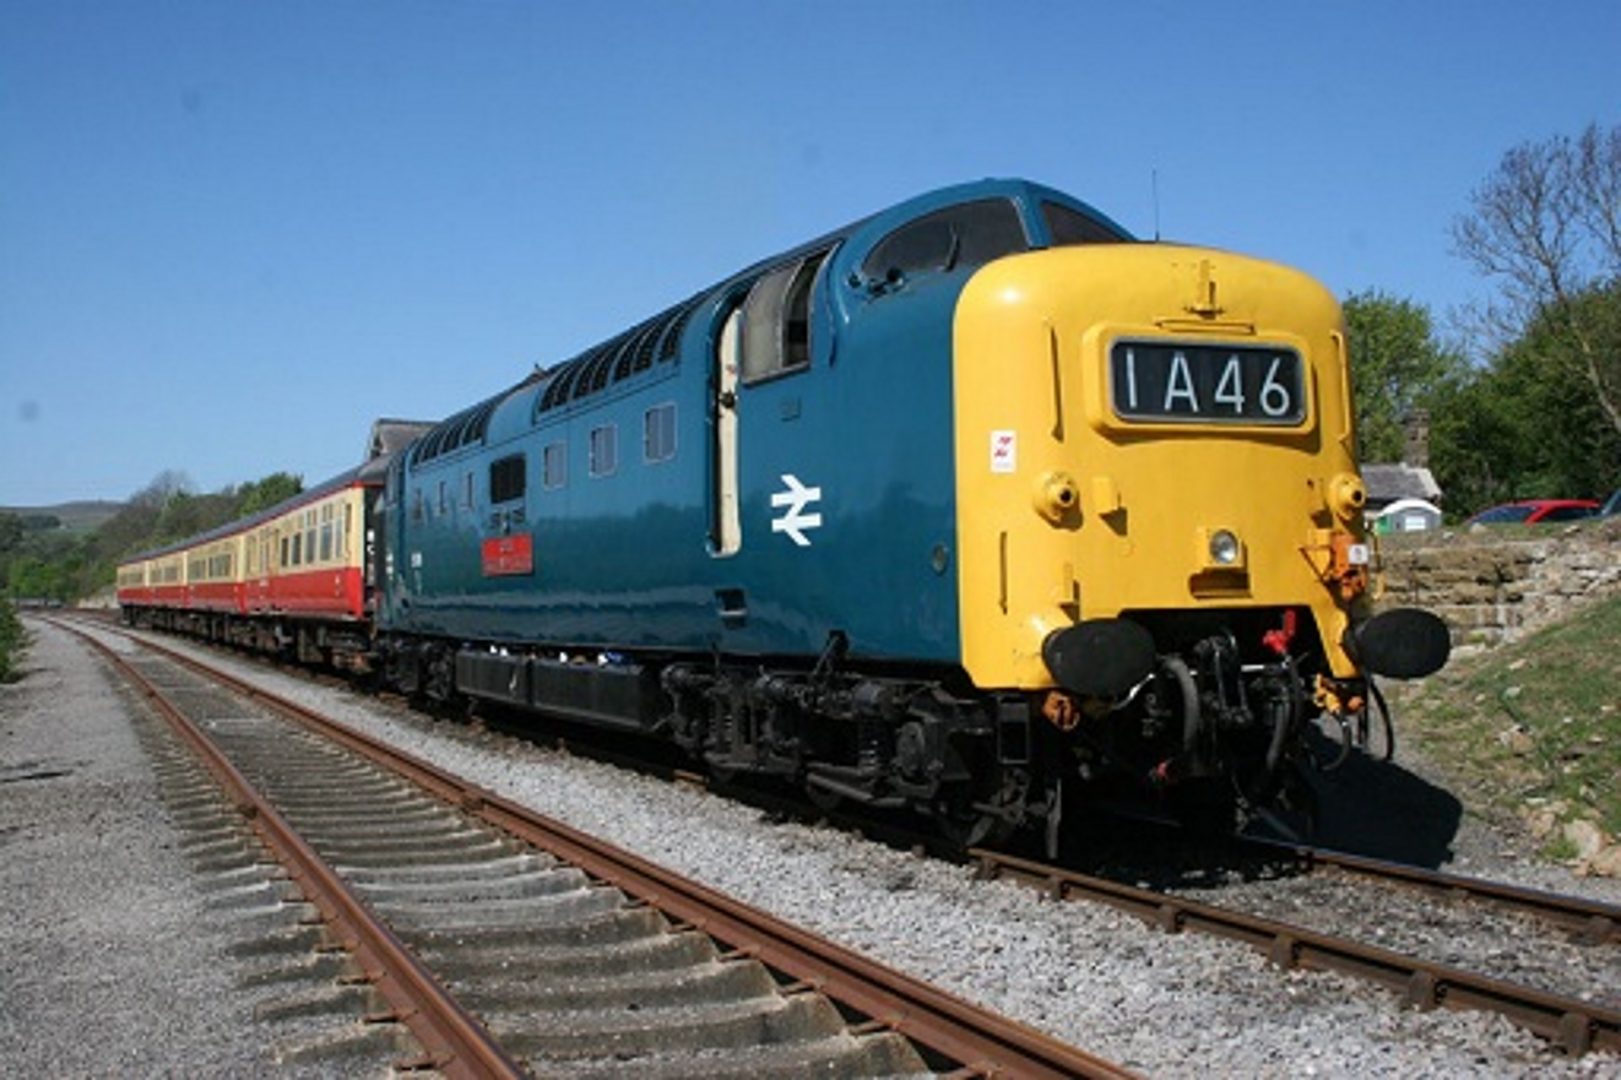 55019 "Royal Highland Fusilier" // Credit: James Whincup and The Deltic Preservation Society Ltd